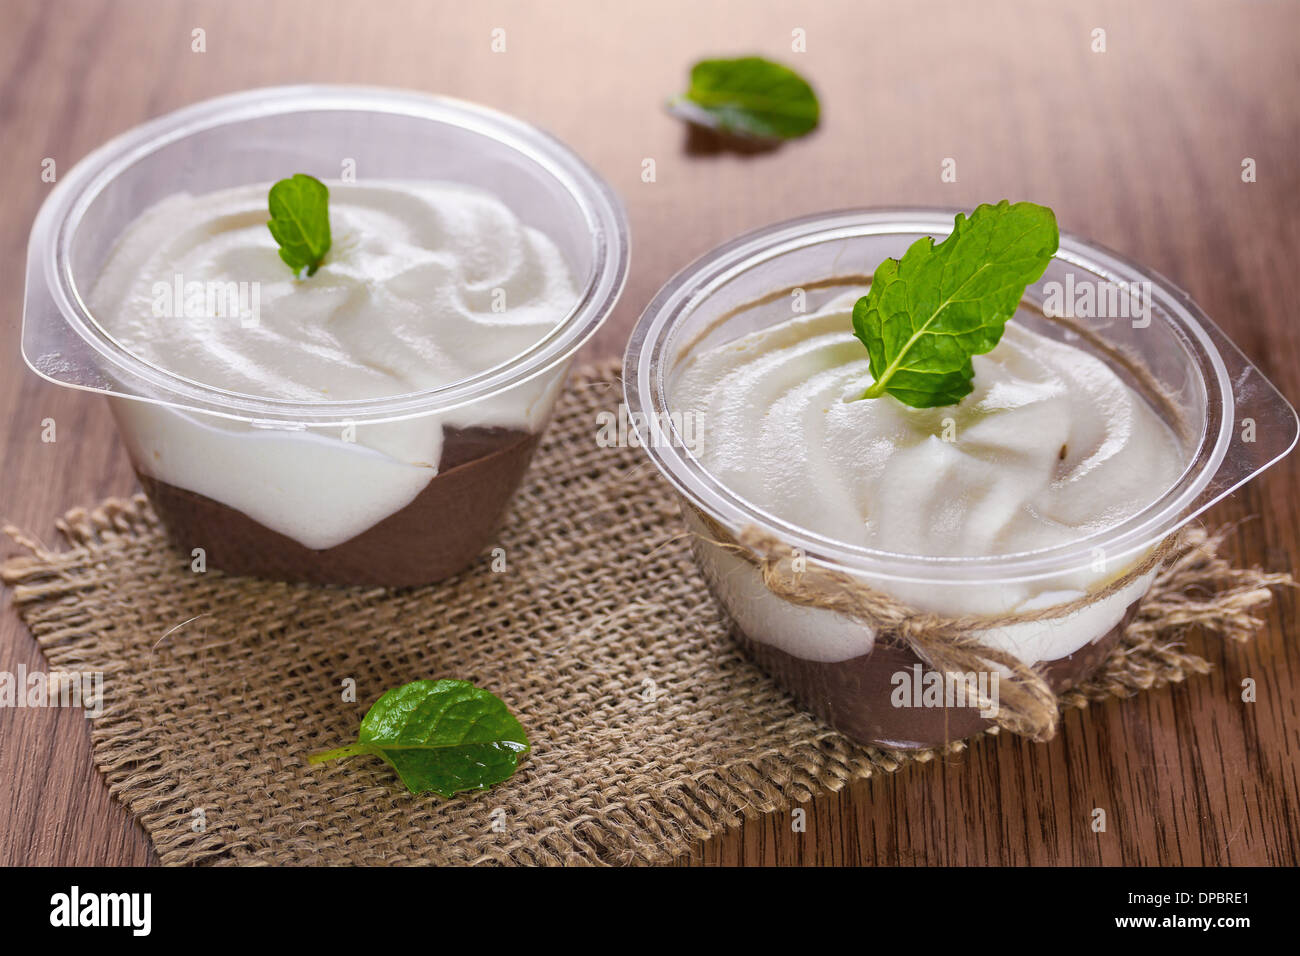 Chocolate pudding with whipped cream and mint leaves Stock Photo